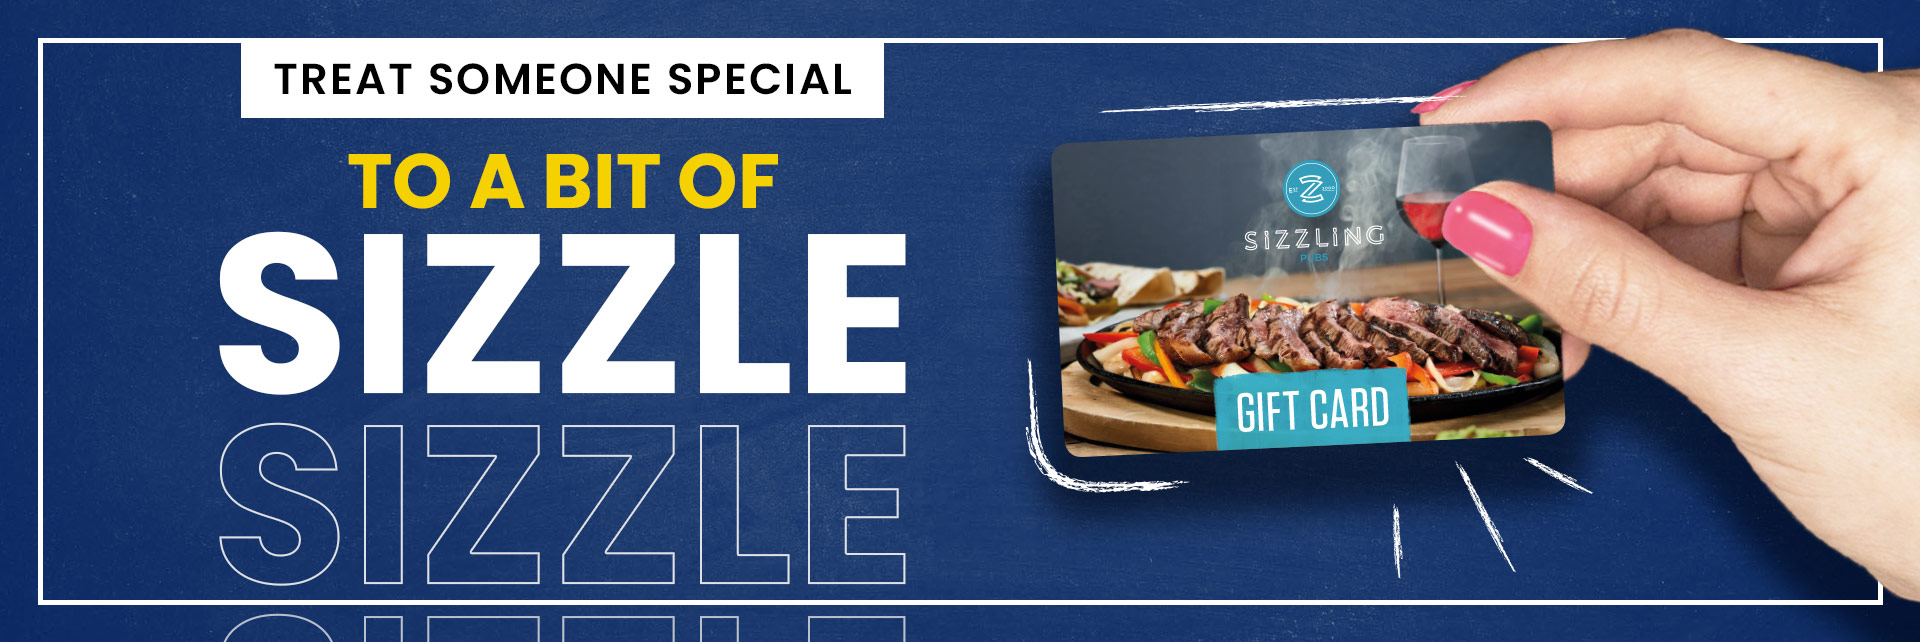 Sizzling Pubs Gift Card at The Stanley Arms in Liverpool